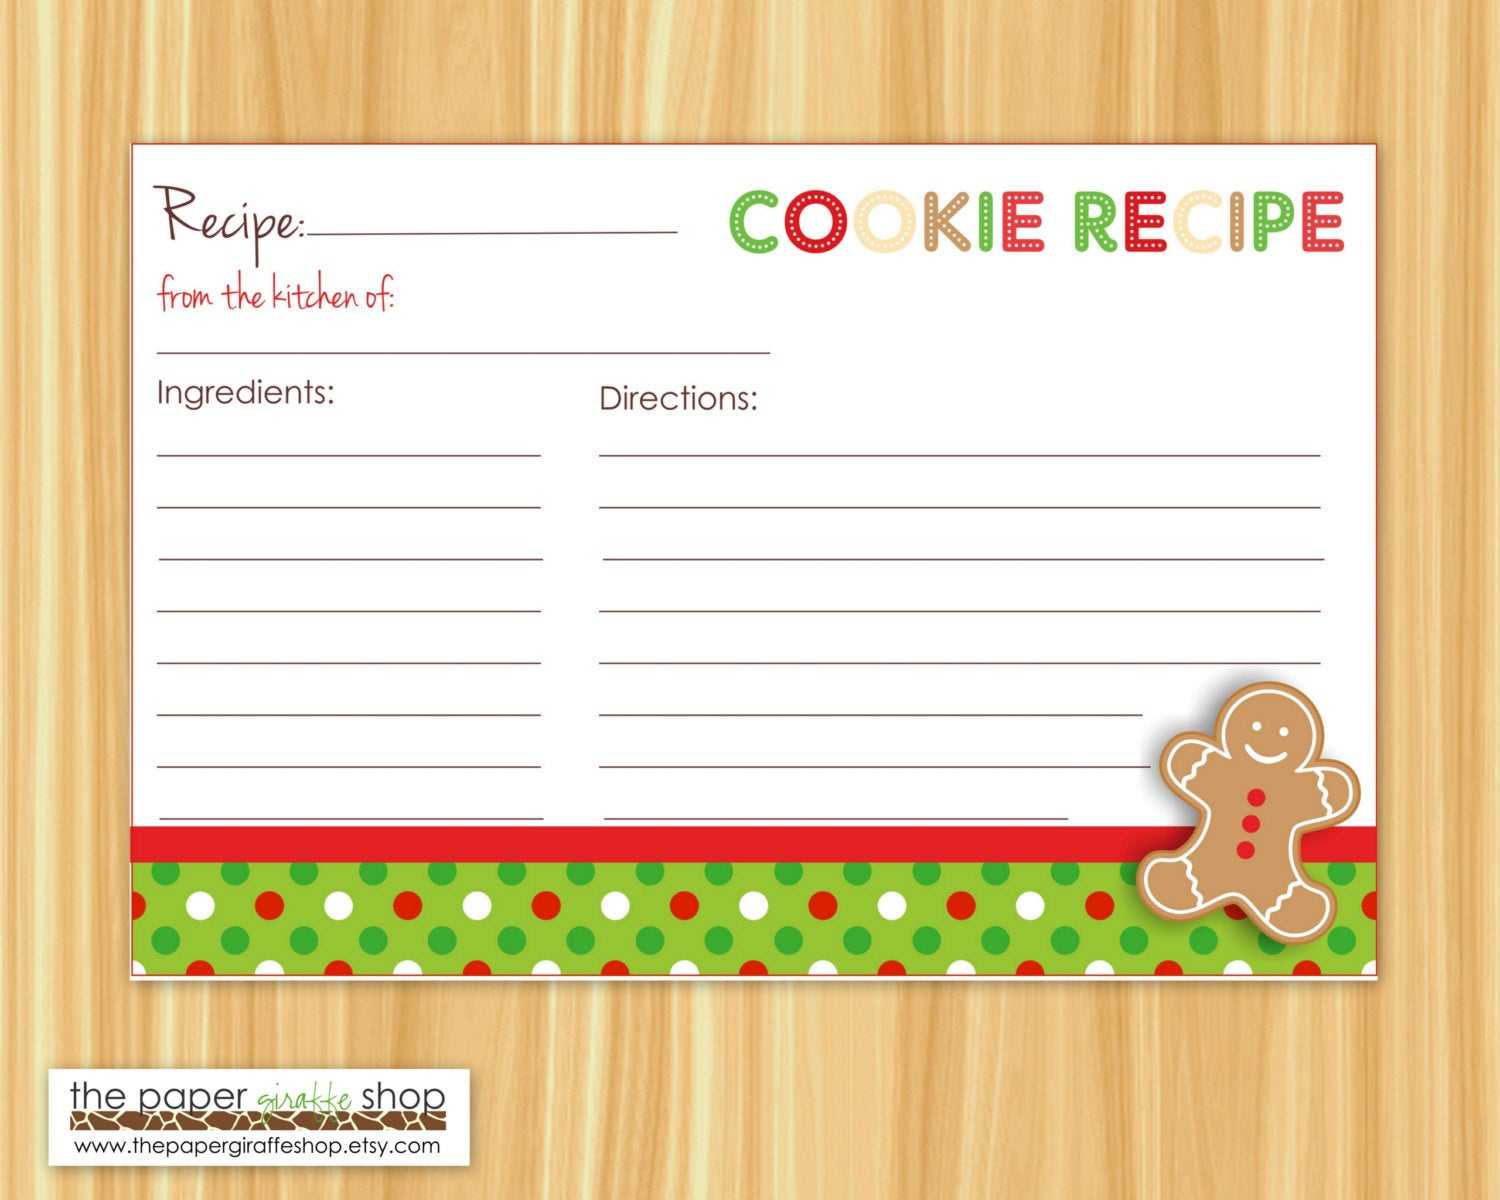 Cookie Exchange Recipe Card Template – Atlantaauctionco With Cookie Exchange Recipe Card Template